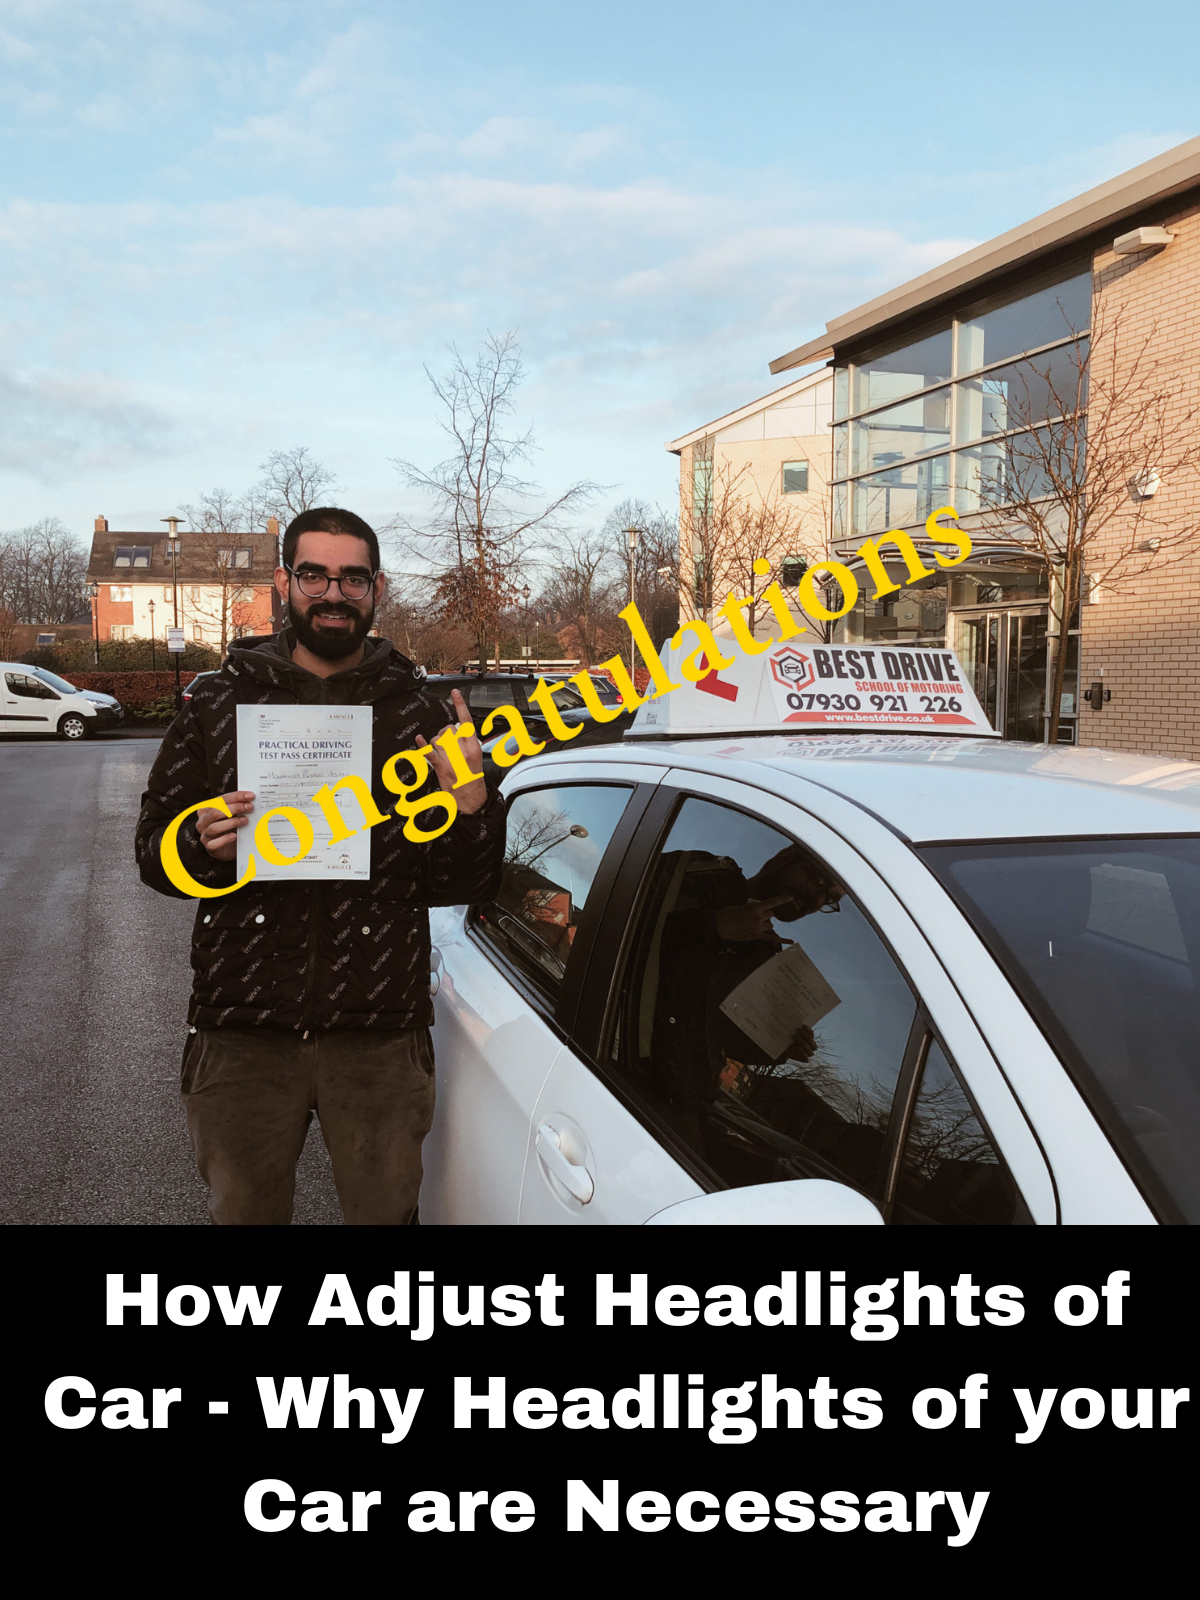 How Adjust Headlights of Car - Why Headlights of your Car are Necessary